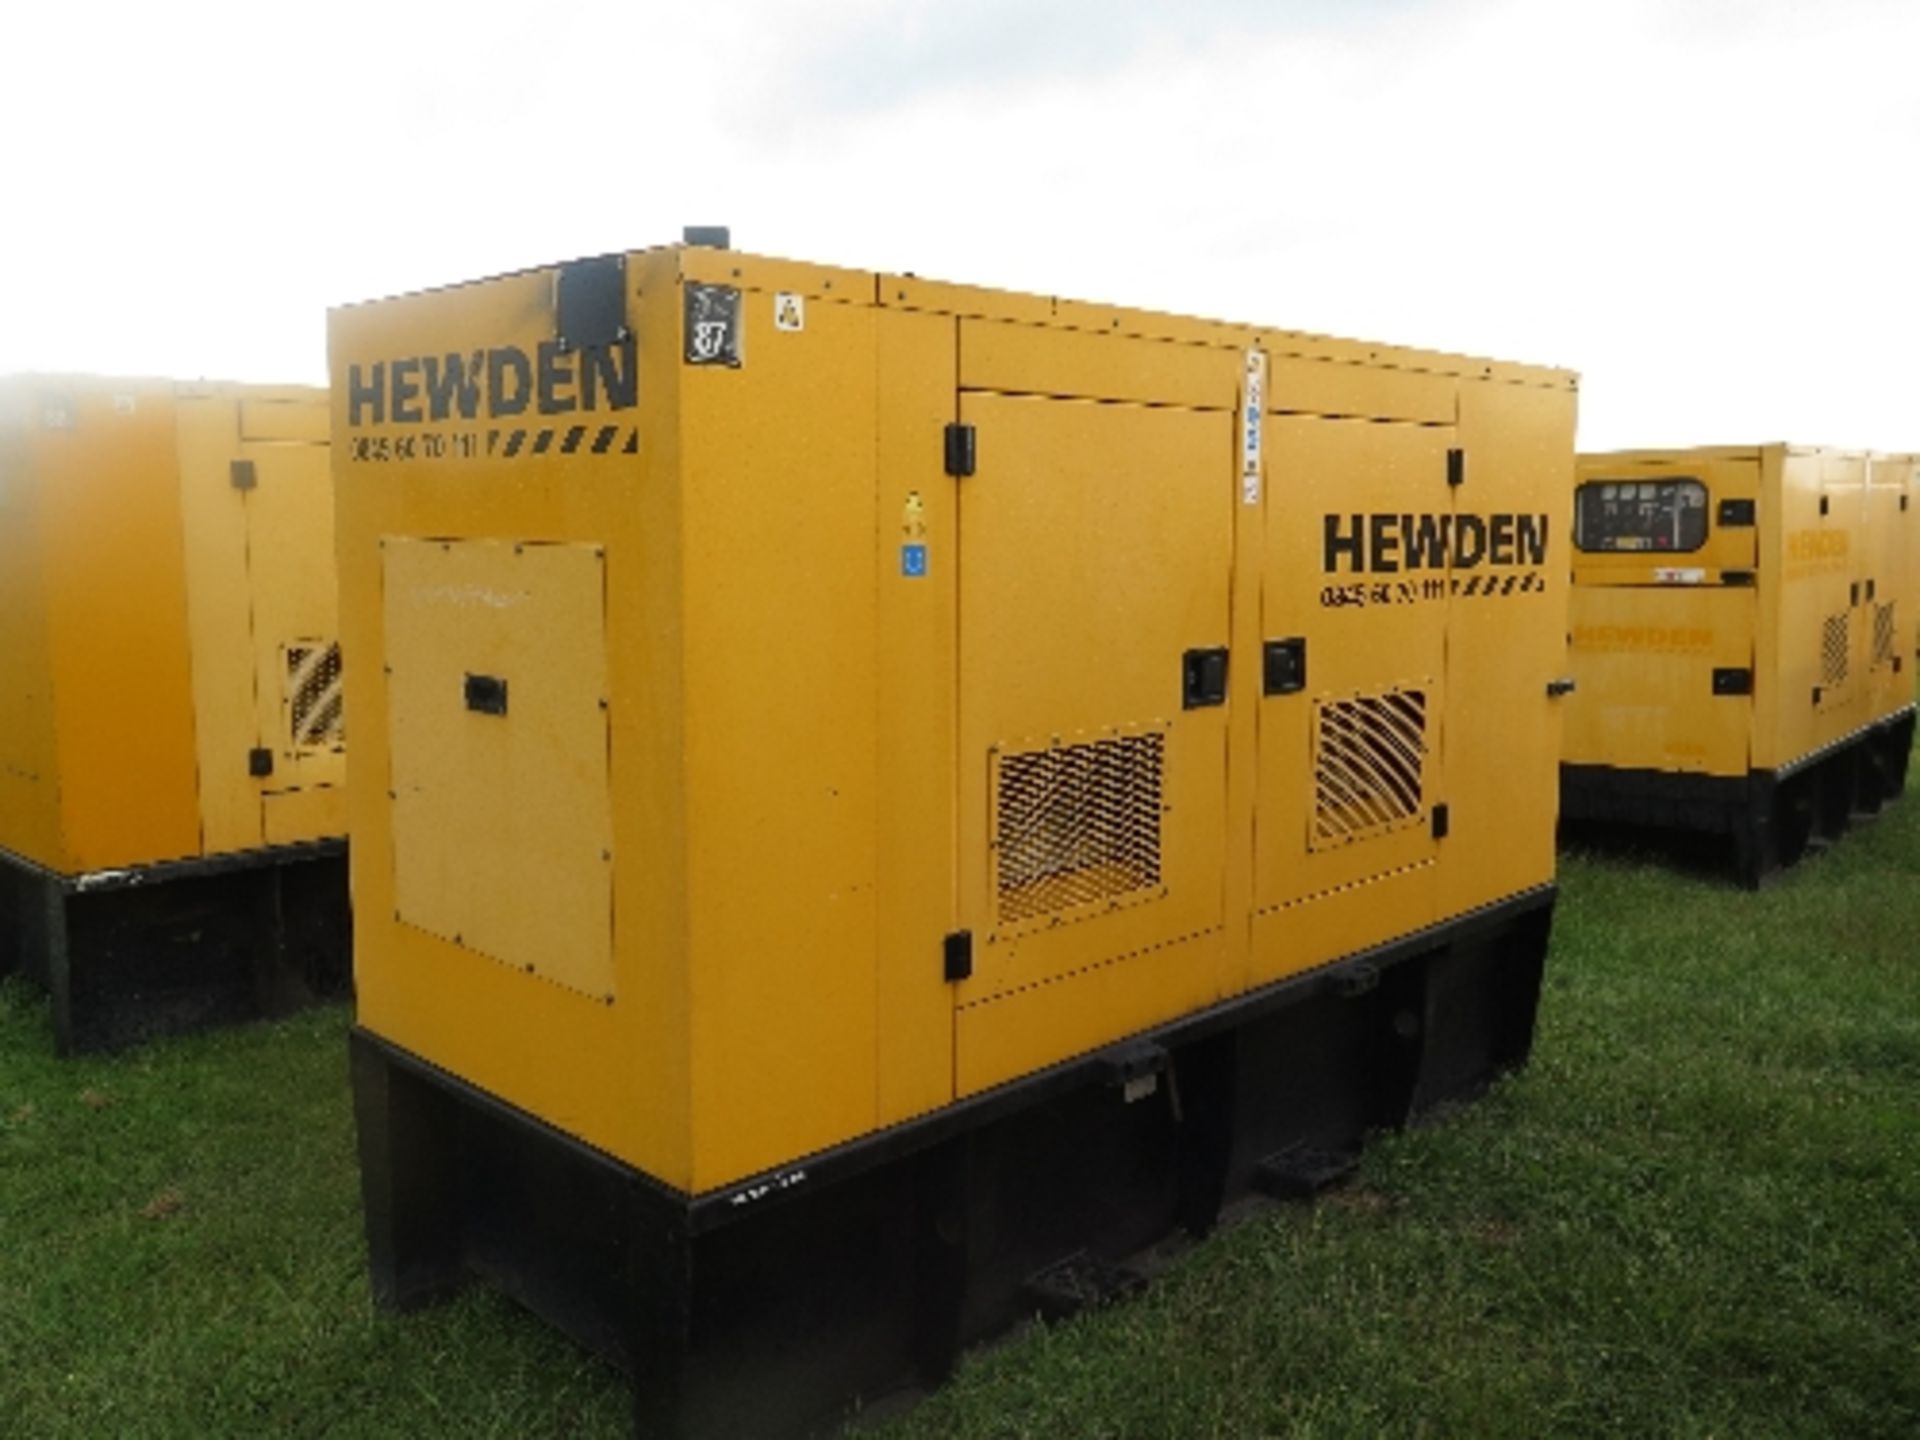 Caterpillar XQE45 generator 21460 hrs 157790
PERKINS - RUNS AND MAKES POWER
ALL LOTS are SOLD AS